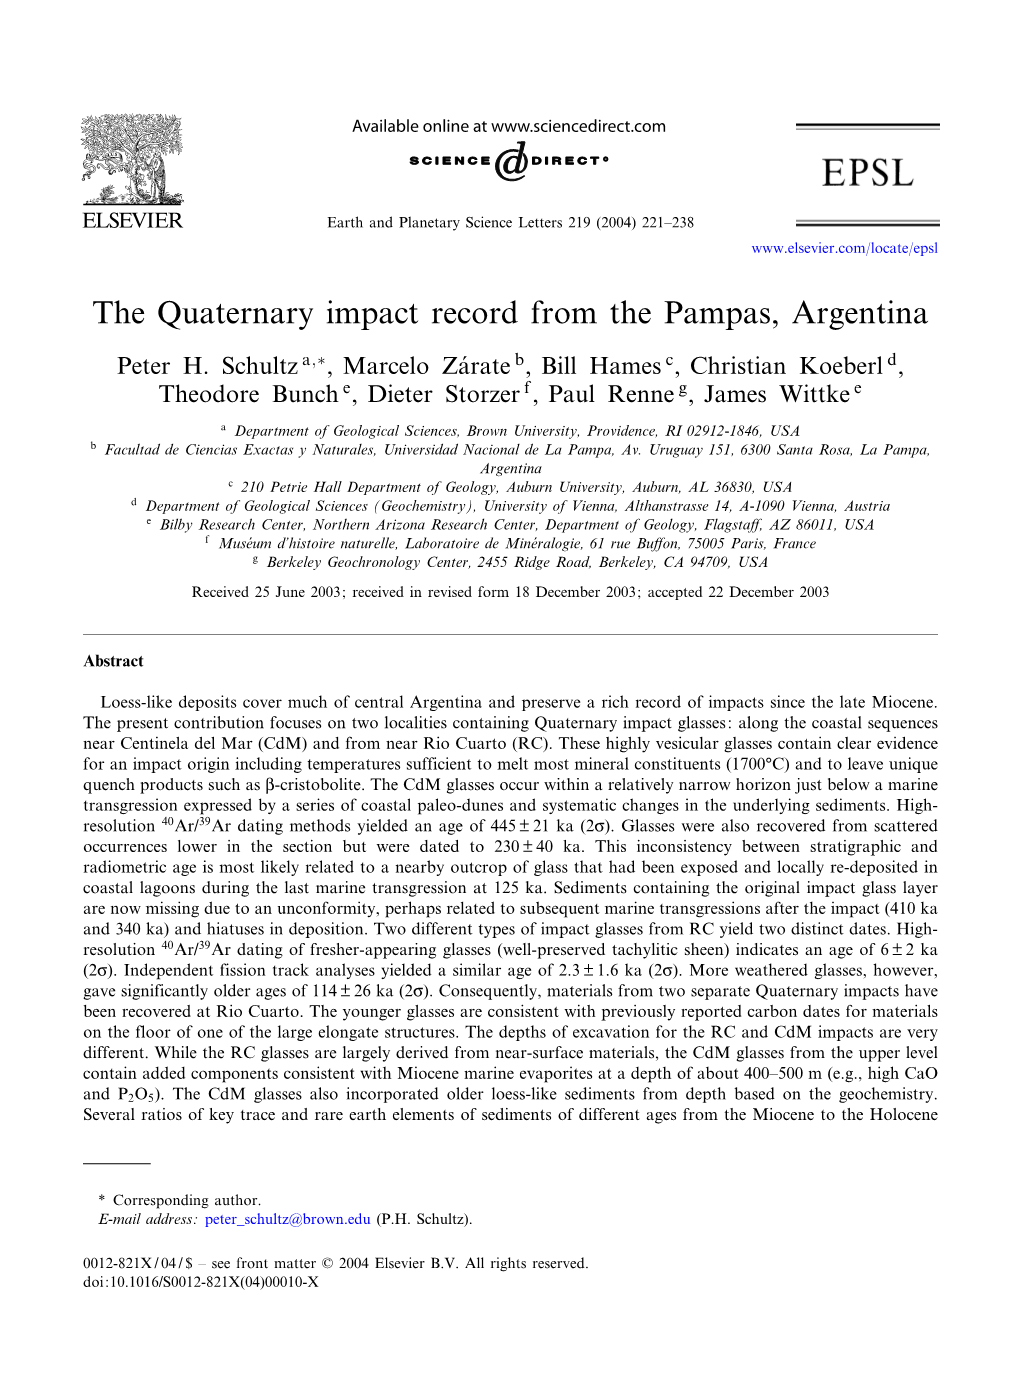 The Quaternary Impact Record from the Pampas, Argentina